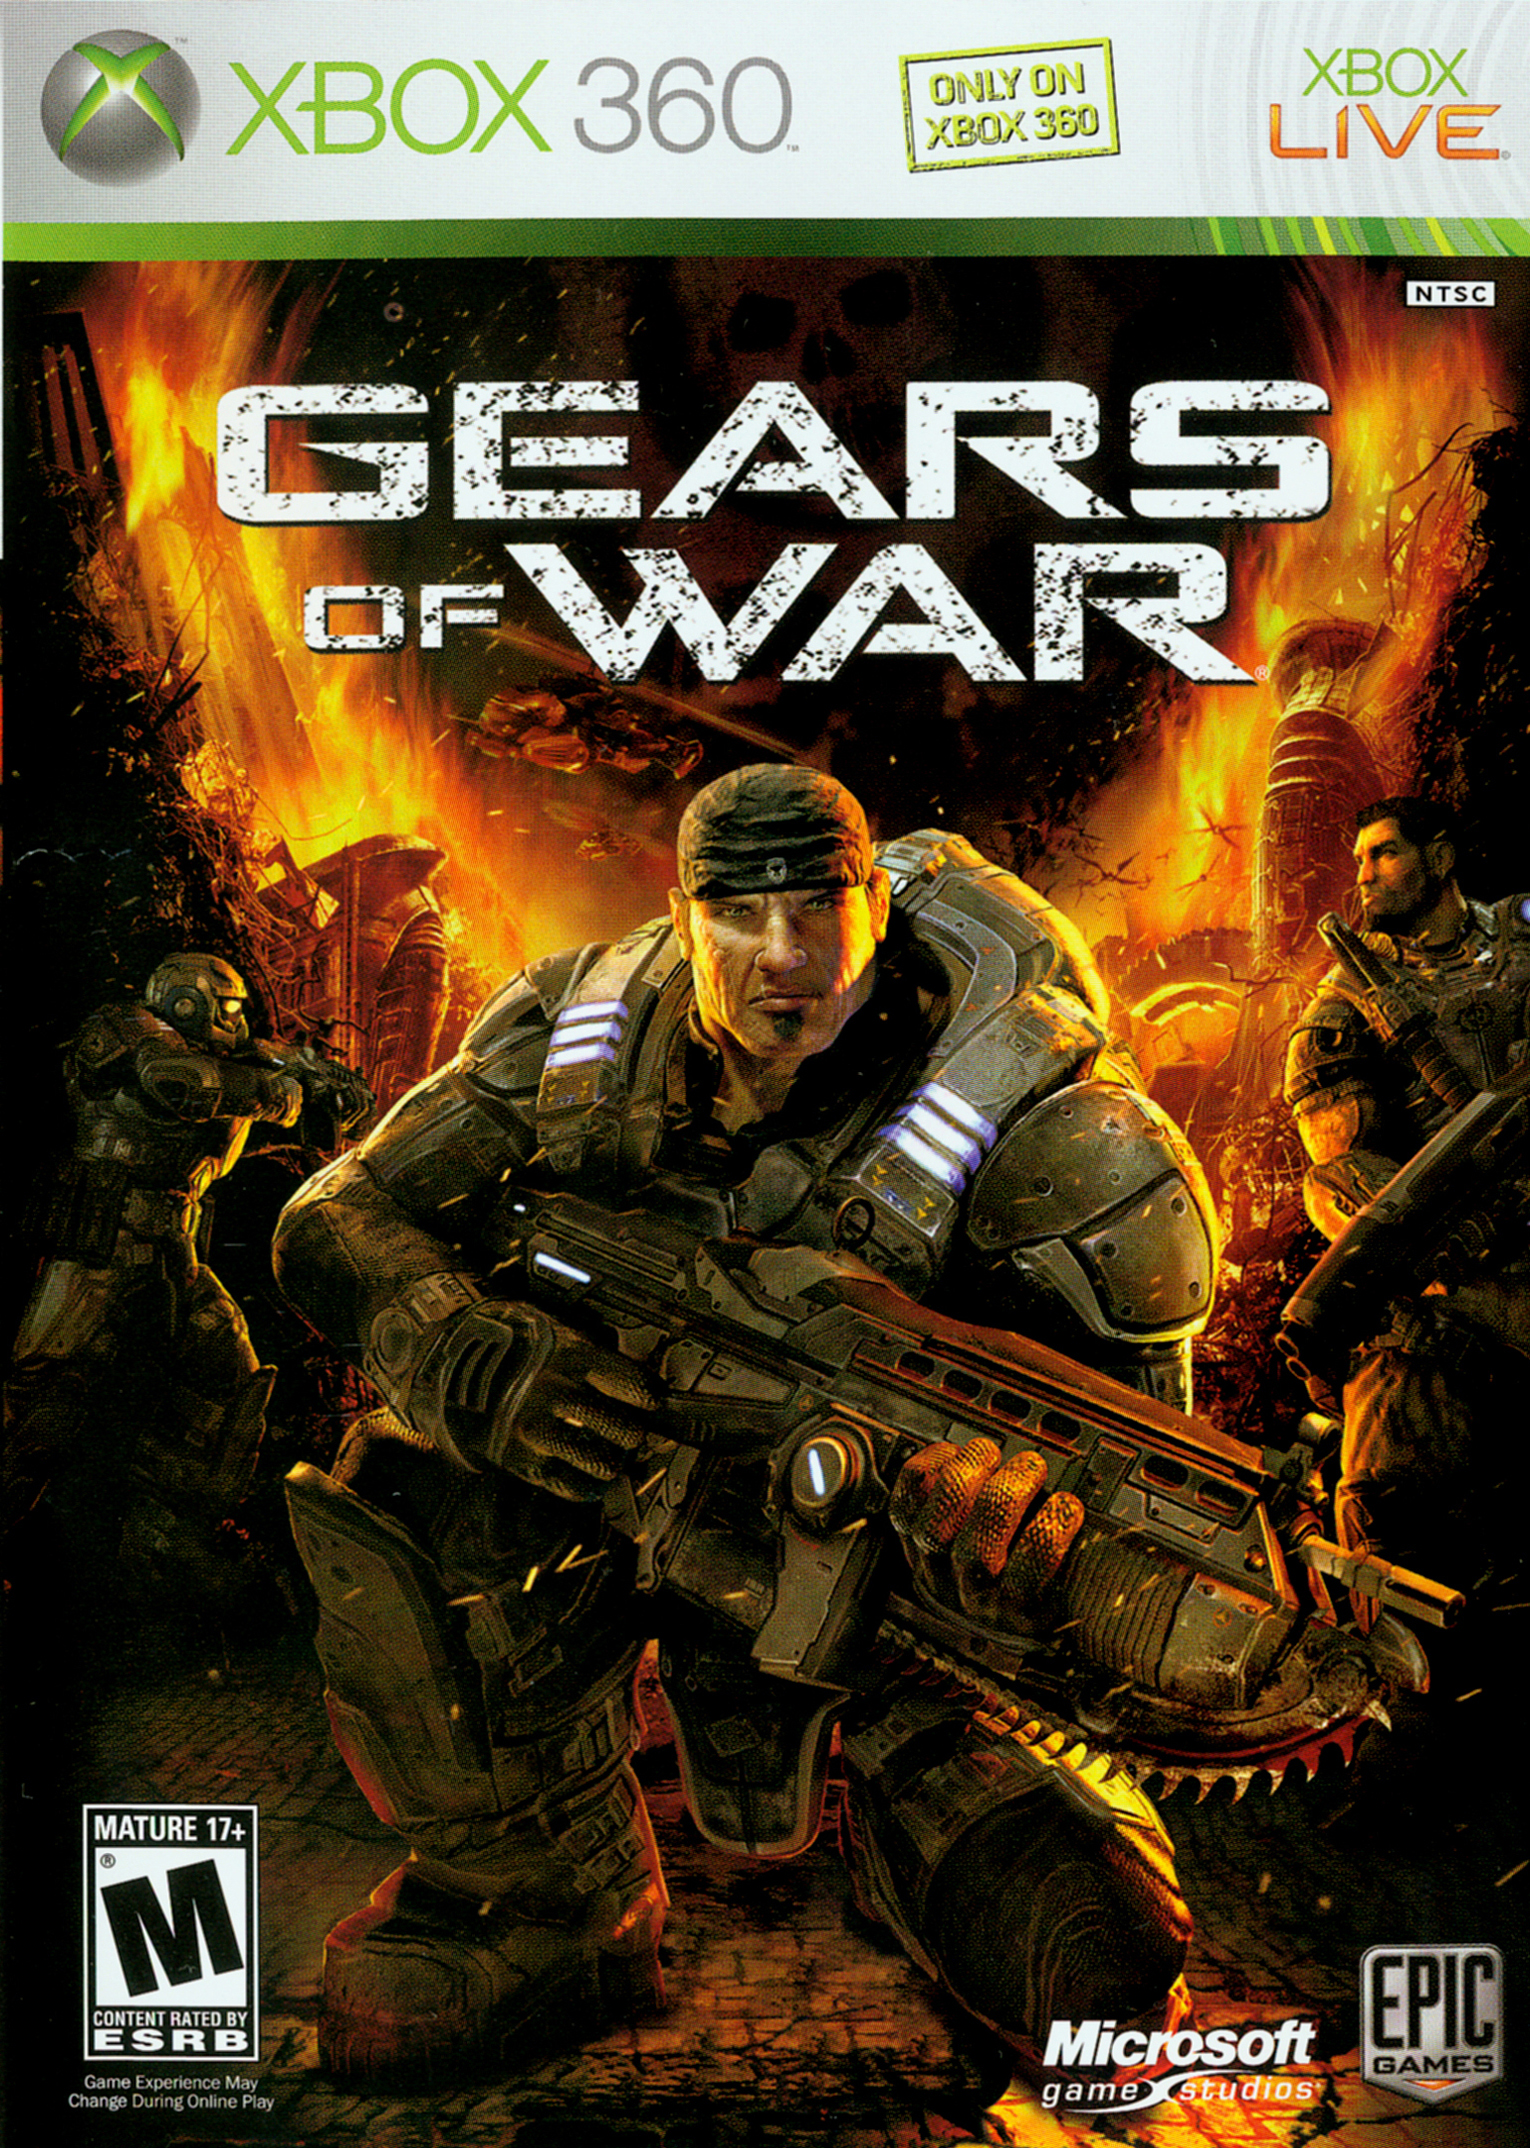 Gears Of War Picture